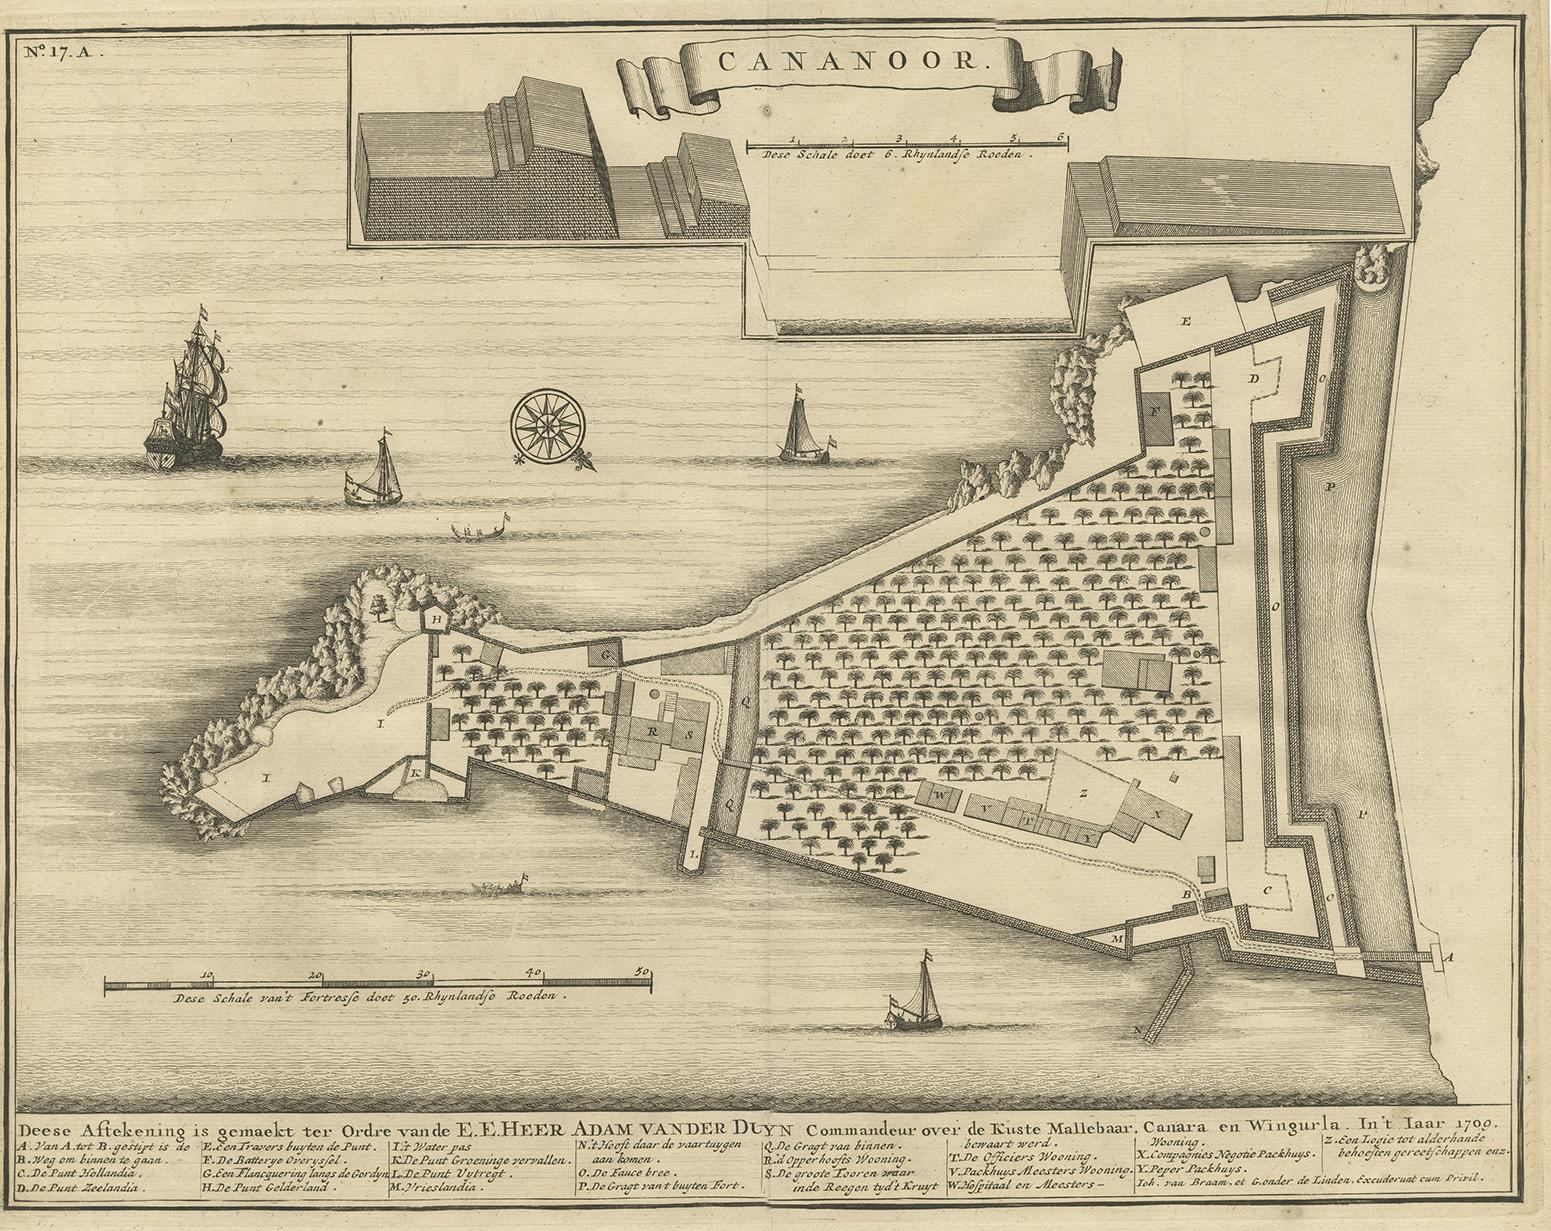 Antique print titled 'Cananoor'. Map of Cananoor, commissioned by Adam van der Duyn, Commodore of Malabar, Canara and Wingurla. This print originates from 'Oud en Nieuw Oost-Indiën' by F. Valentijn.